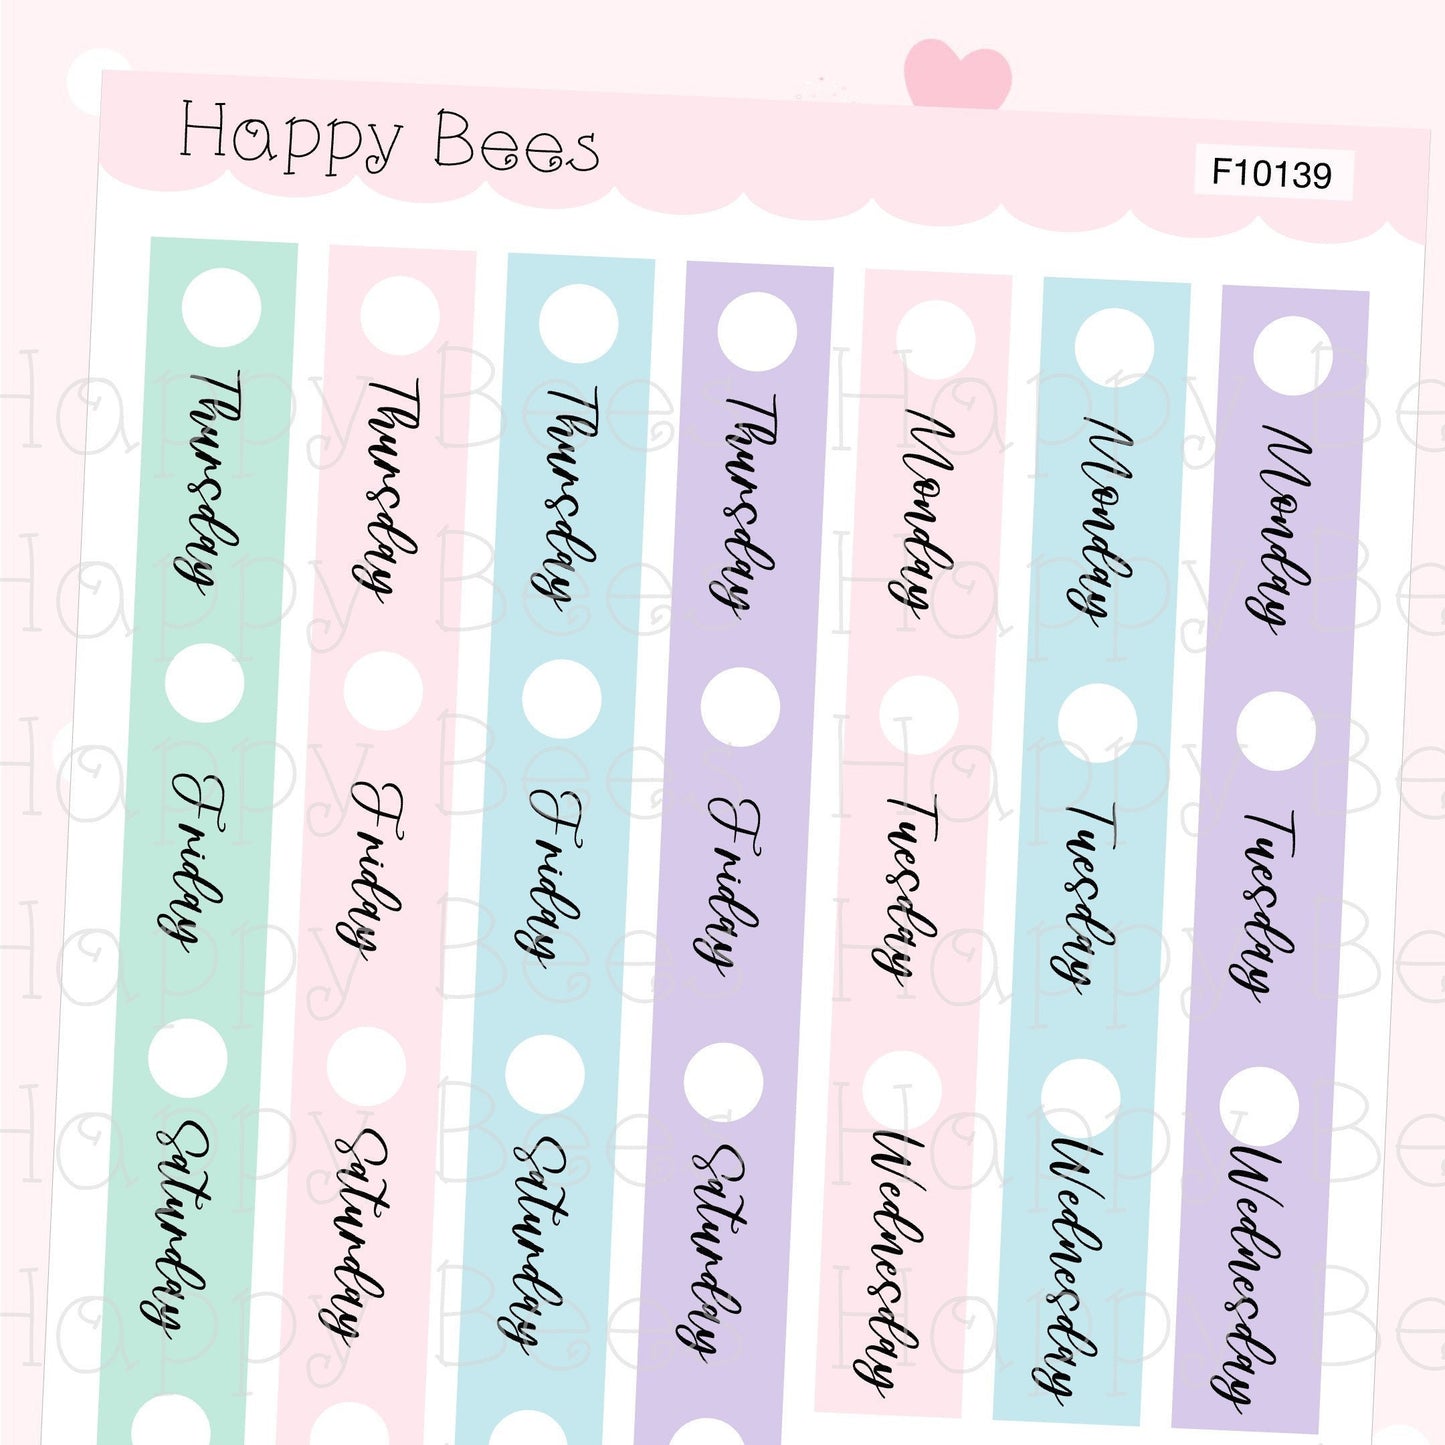 Weekly Date Covers & Day Off - Functional Cute Hobonichi Cousin Planner Stickers F10139